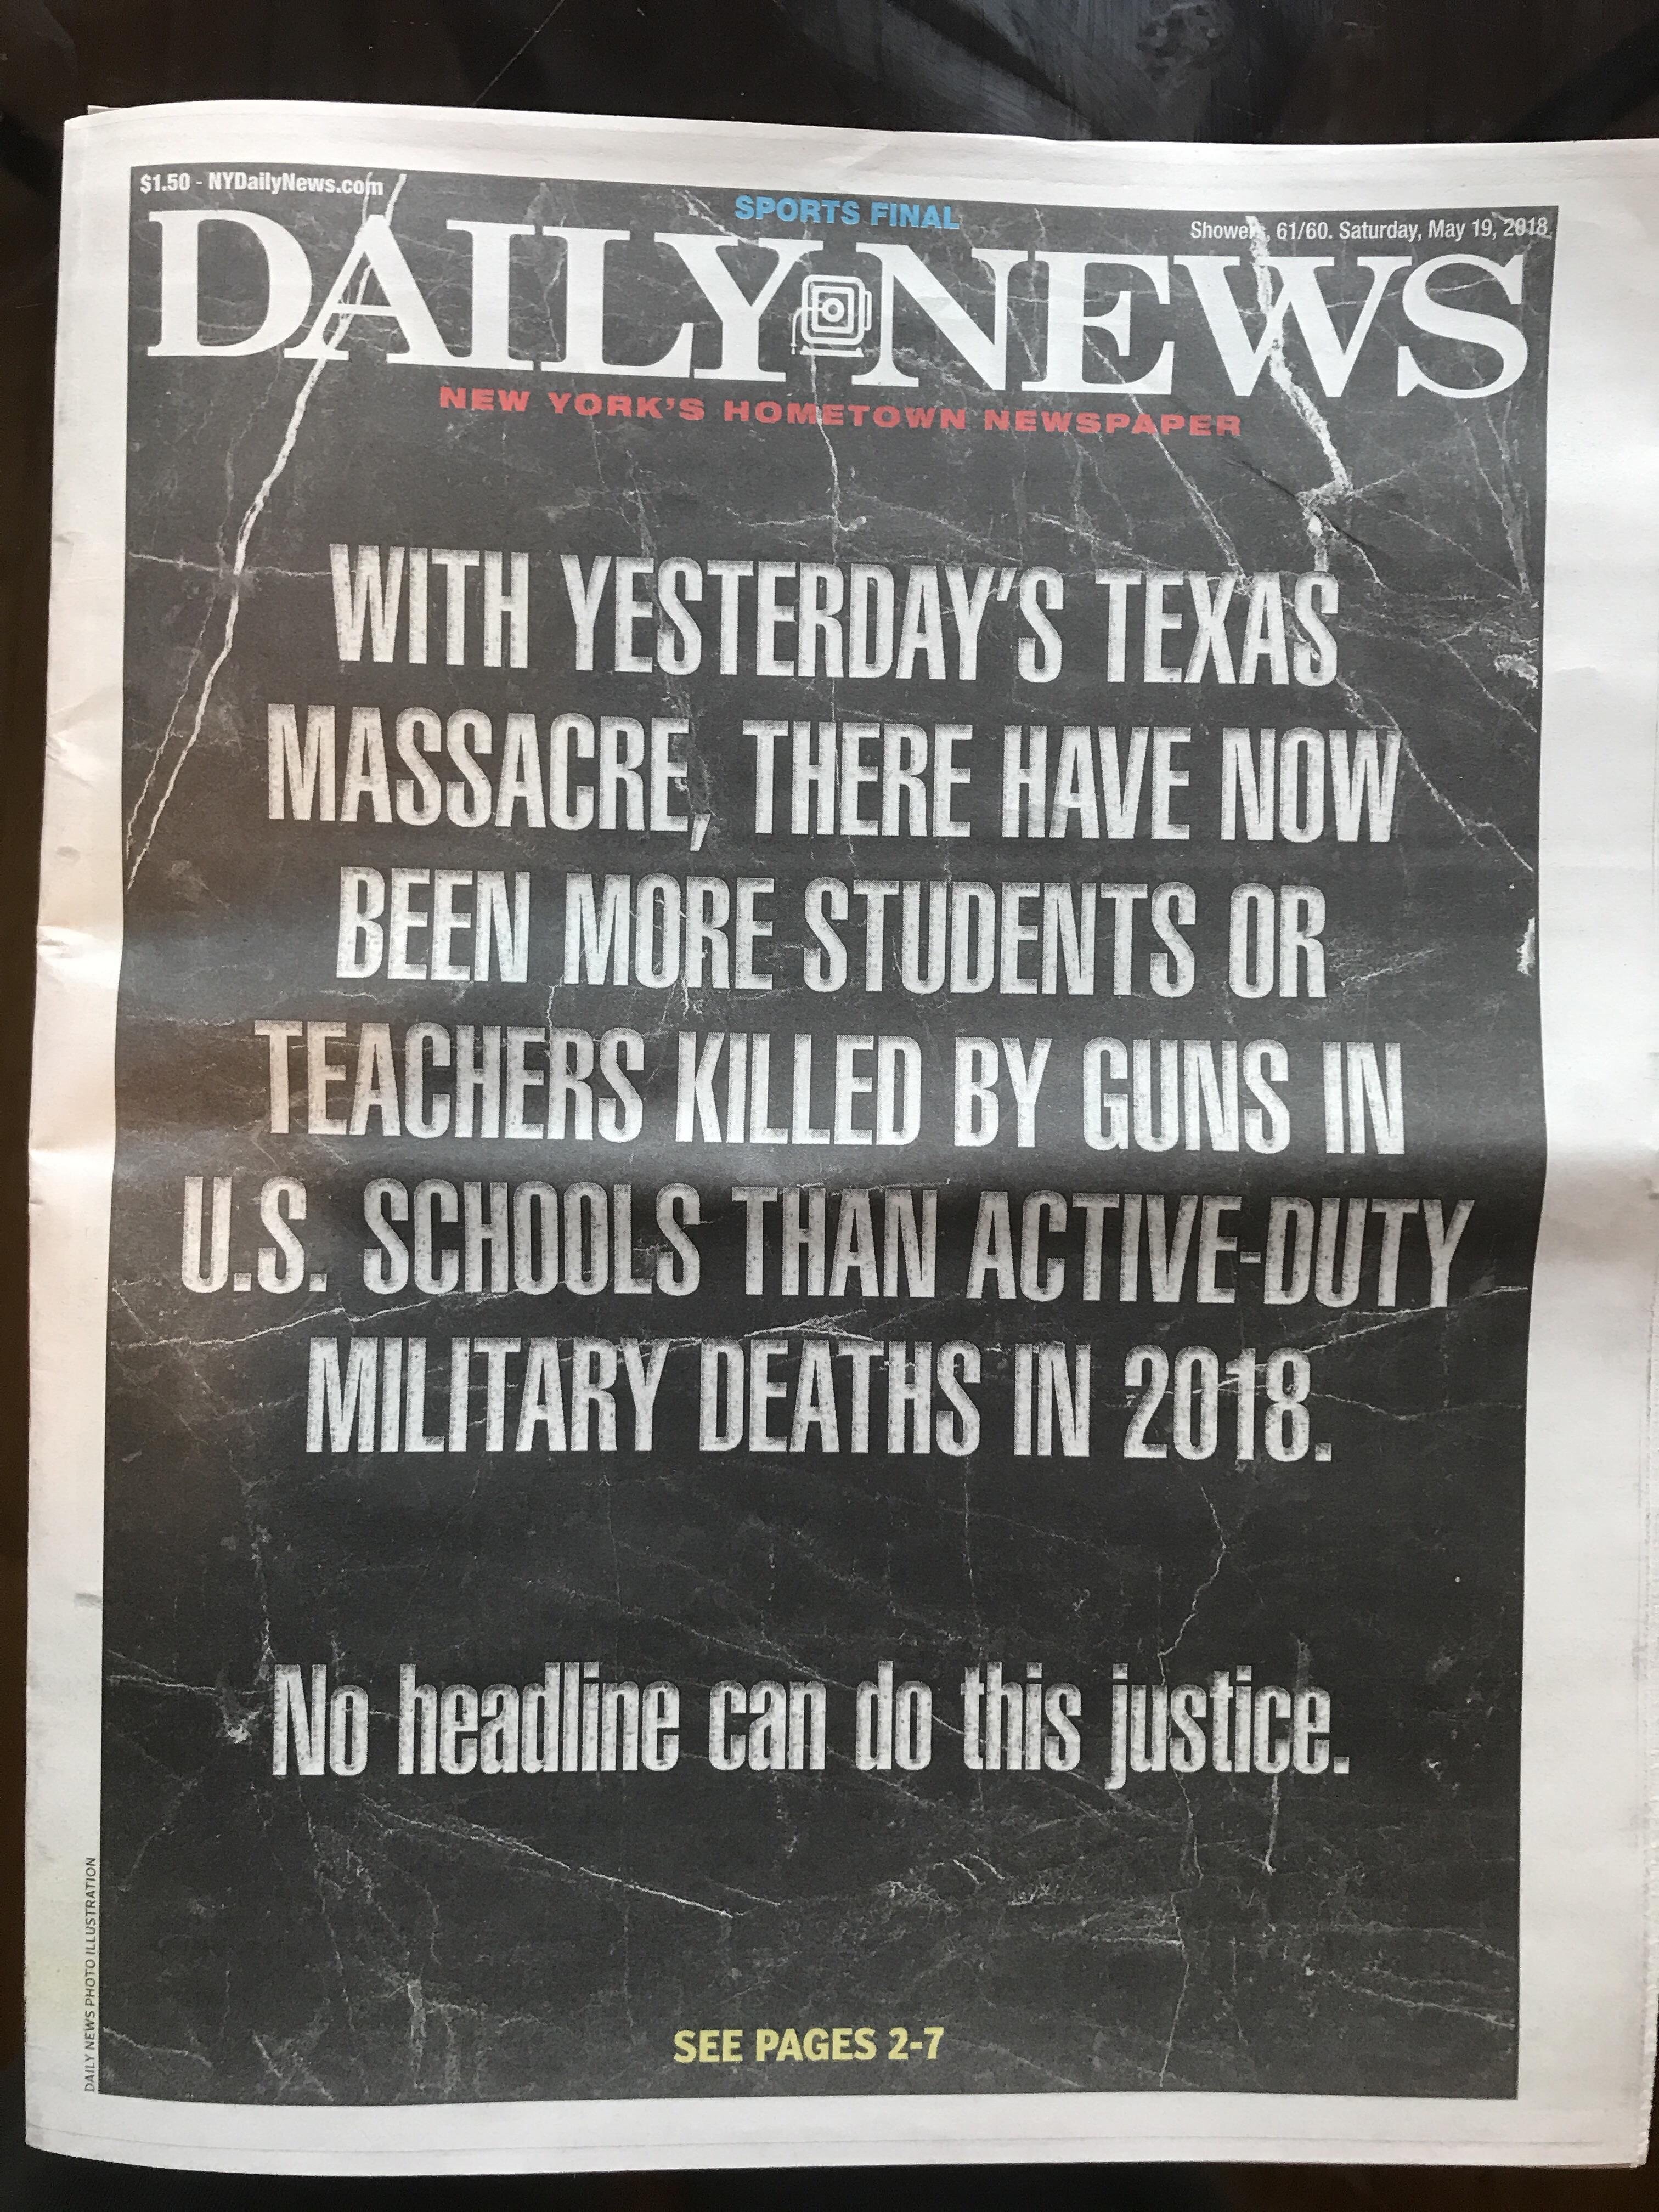 With yesterday’s Texas massace, there have now been more students or teachers killed by guns in U.S. schools than active-duty military deaths in 2018. No headline can do this justice.